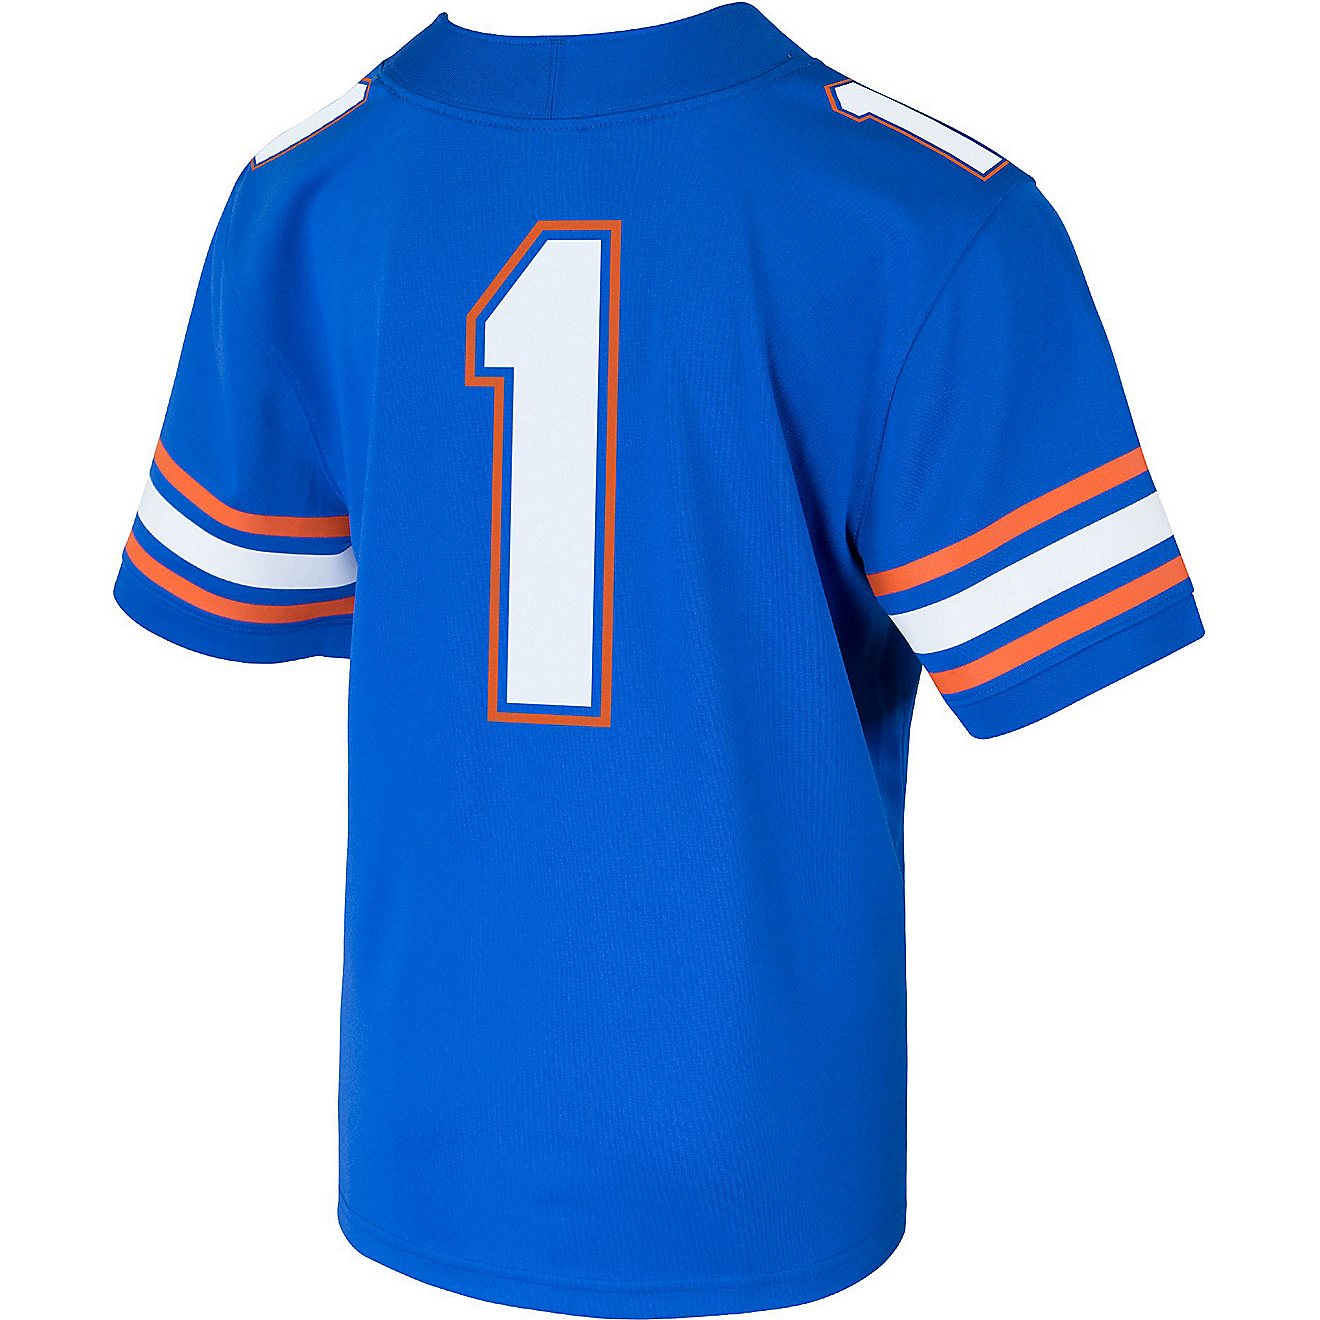 Nike Boys' University of Florida Untouchable Replica Football Jersey                                                             - view number 2